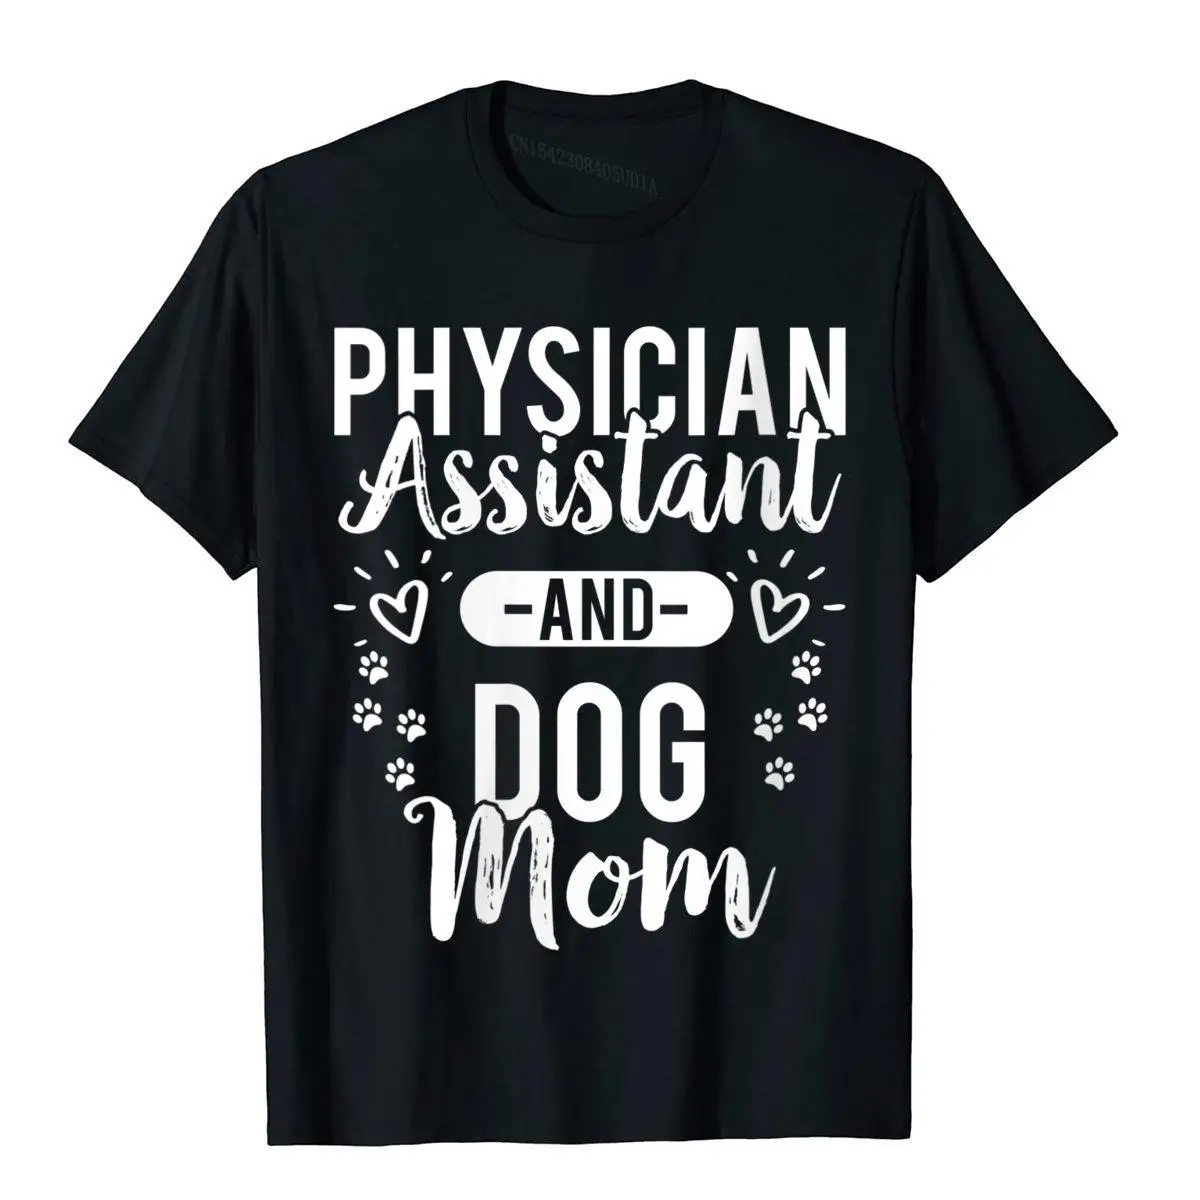 

Womens Physician Assistant Shirt Physician Assistant And Dog Mom T-Shirt Cosie T Shirt Latest Cotton Mens Tops Shirts Crazy